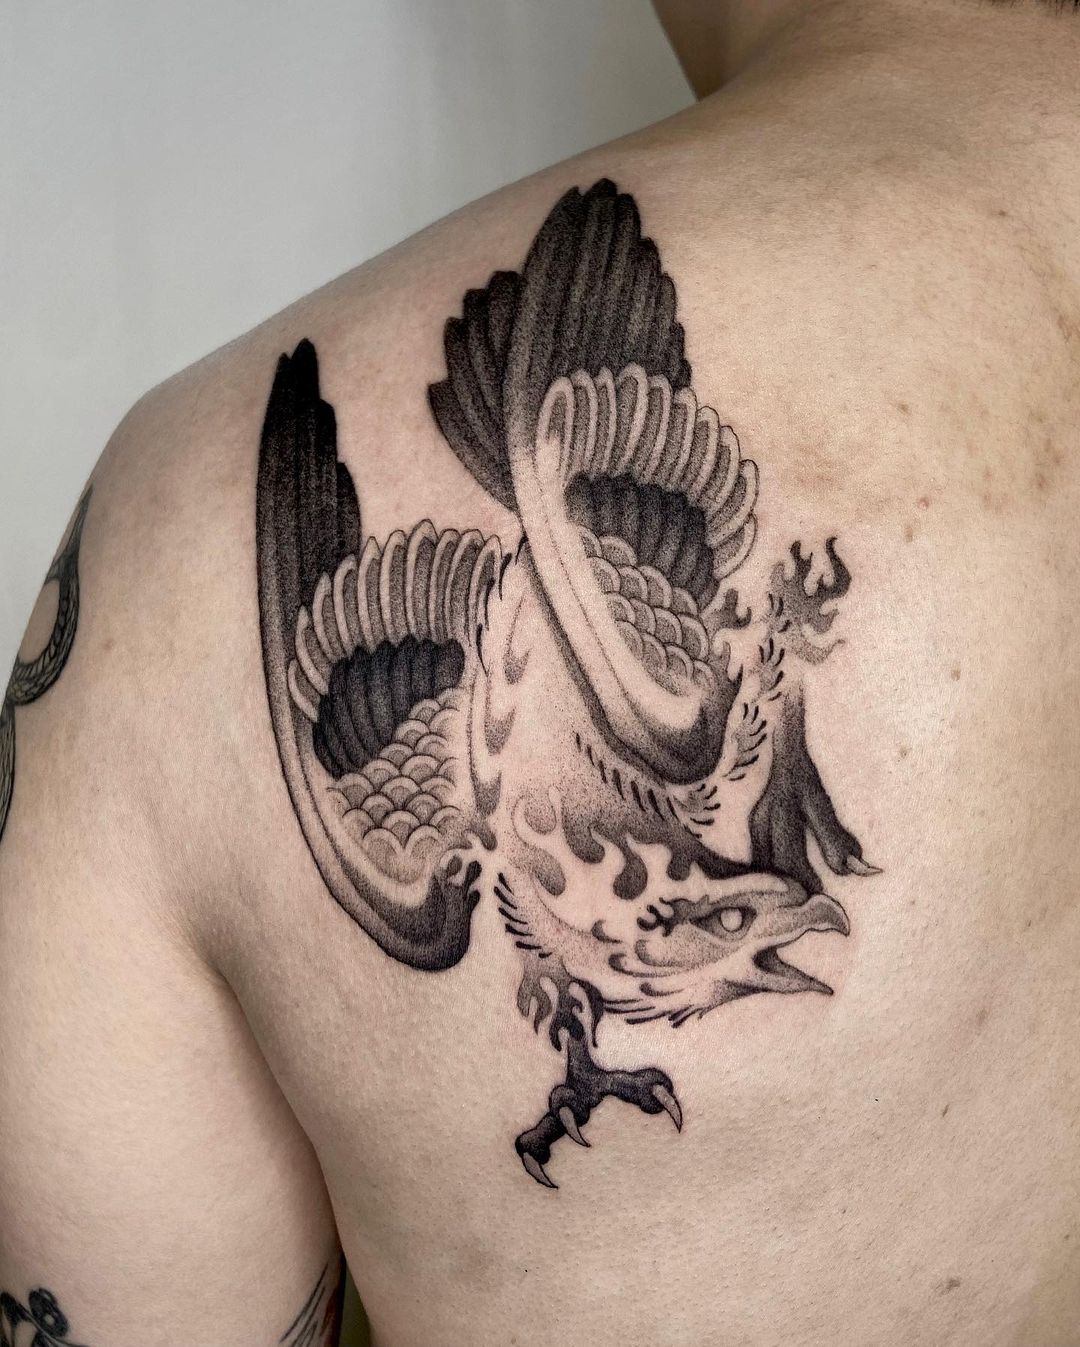 Micro-realistic falcon tattooed on the inner arm.